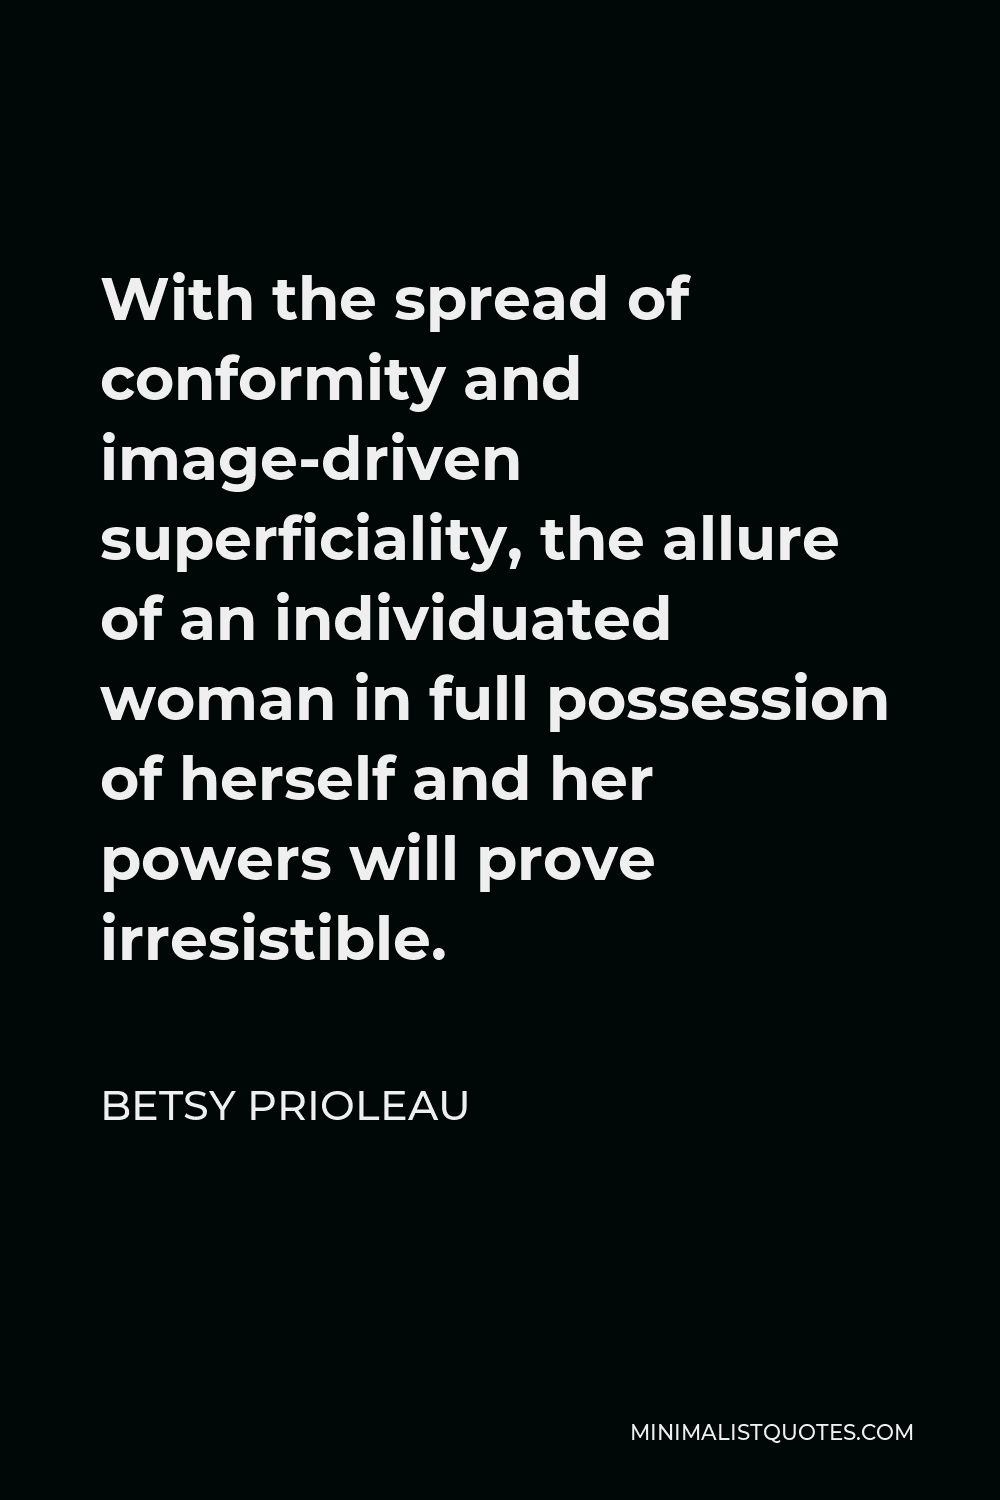 Betsy Prioleau Quote - With the spread of conformity and image-driven superficiality, the allure of an individuated woman in full possession of herself and her powers will prove irresistible.